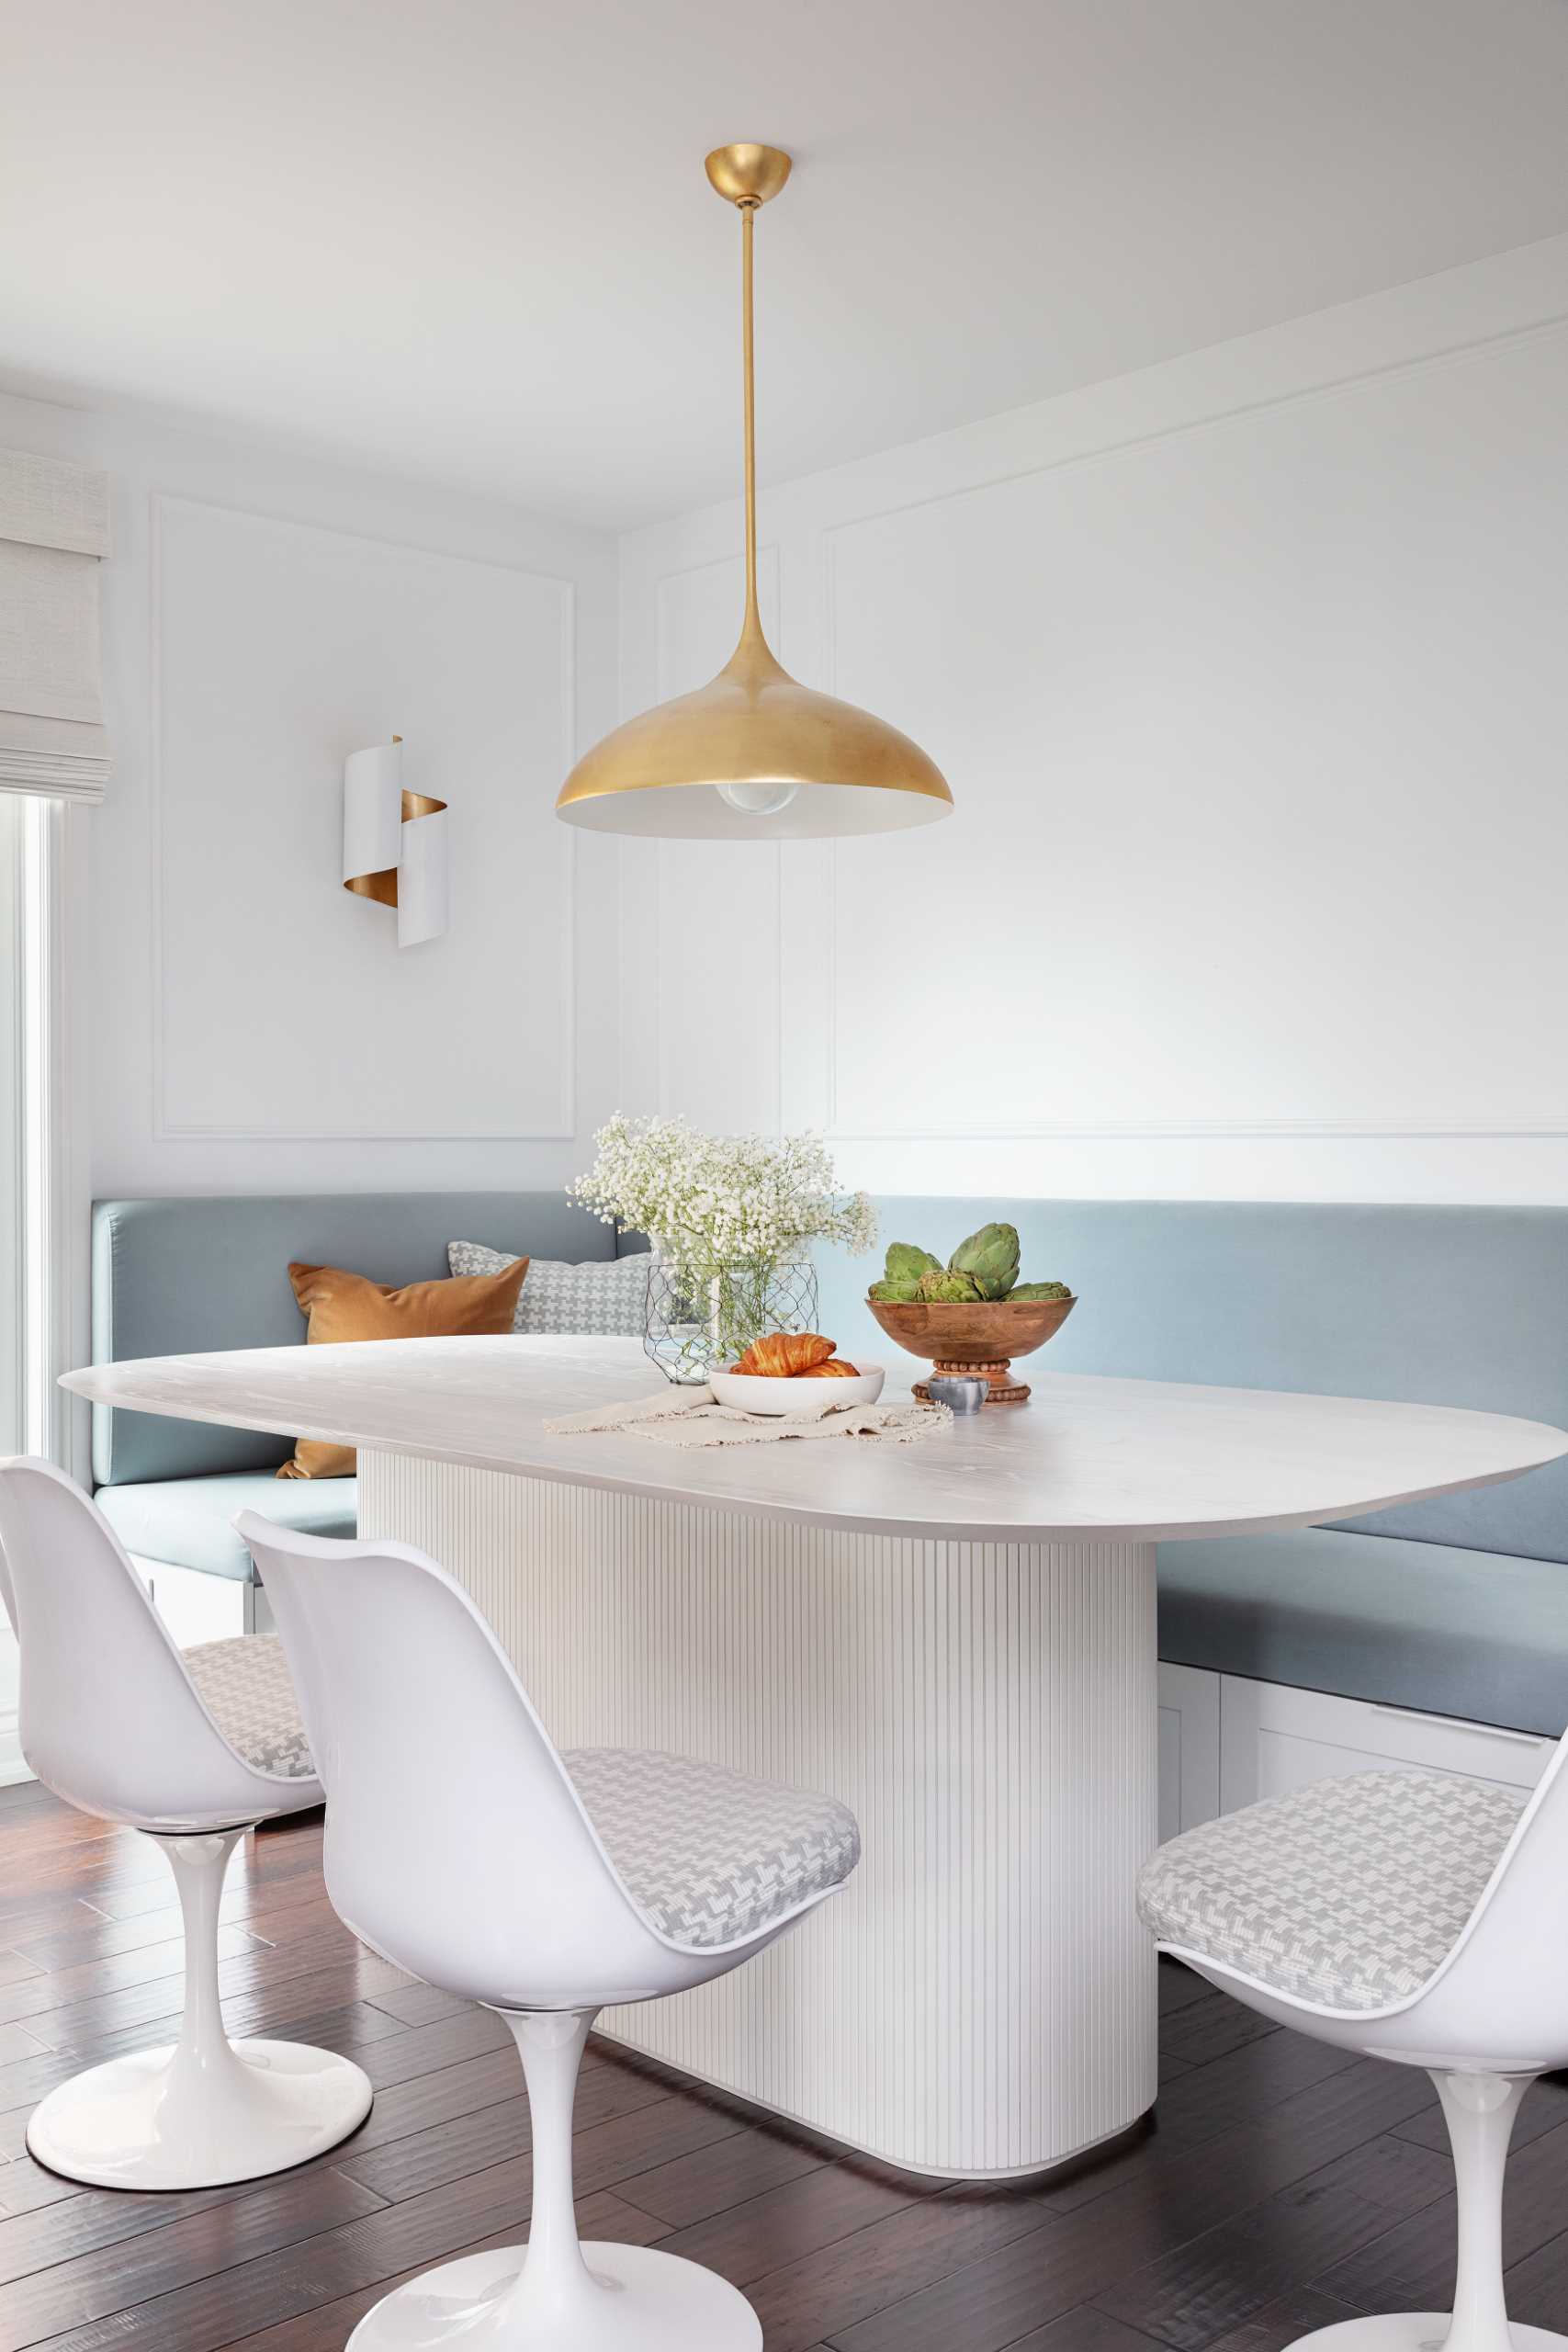 A contemporary dining area with banquette seating that lines the corner. The pale blue cushions add a soft pop of color to the mostly white space.